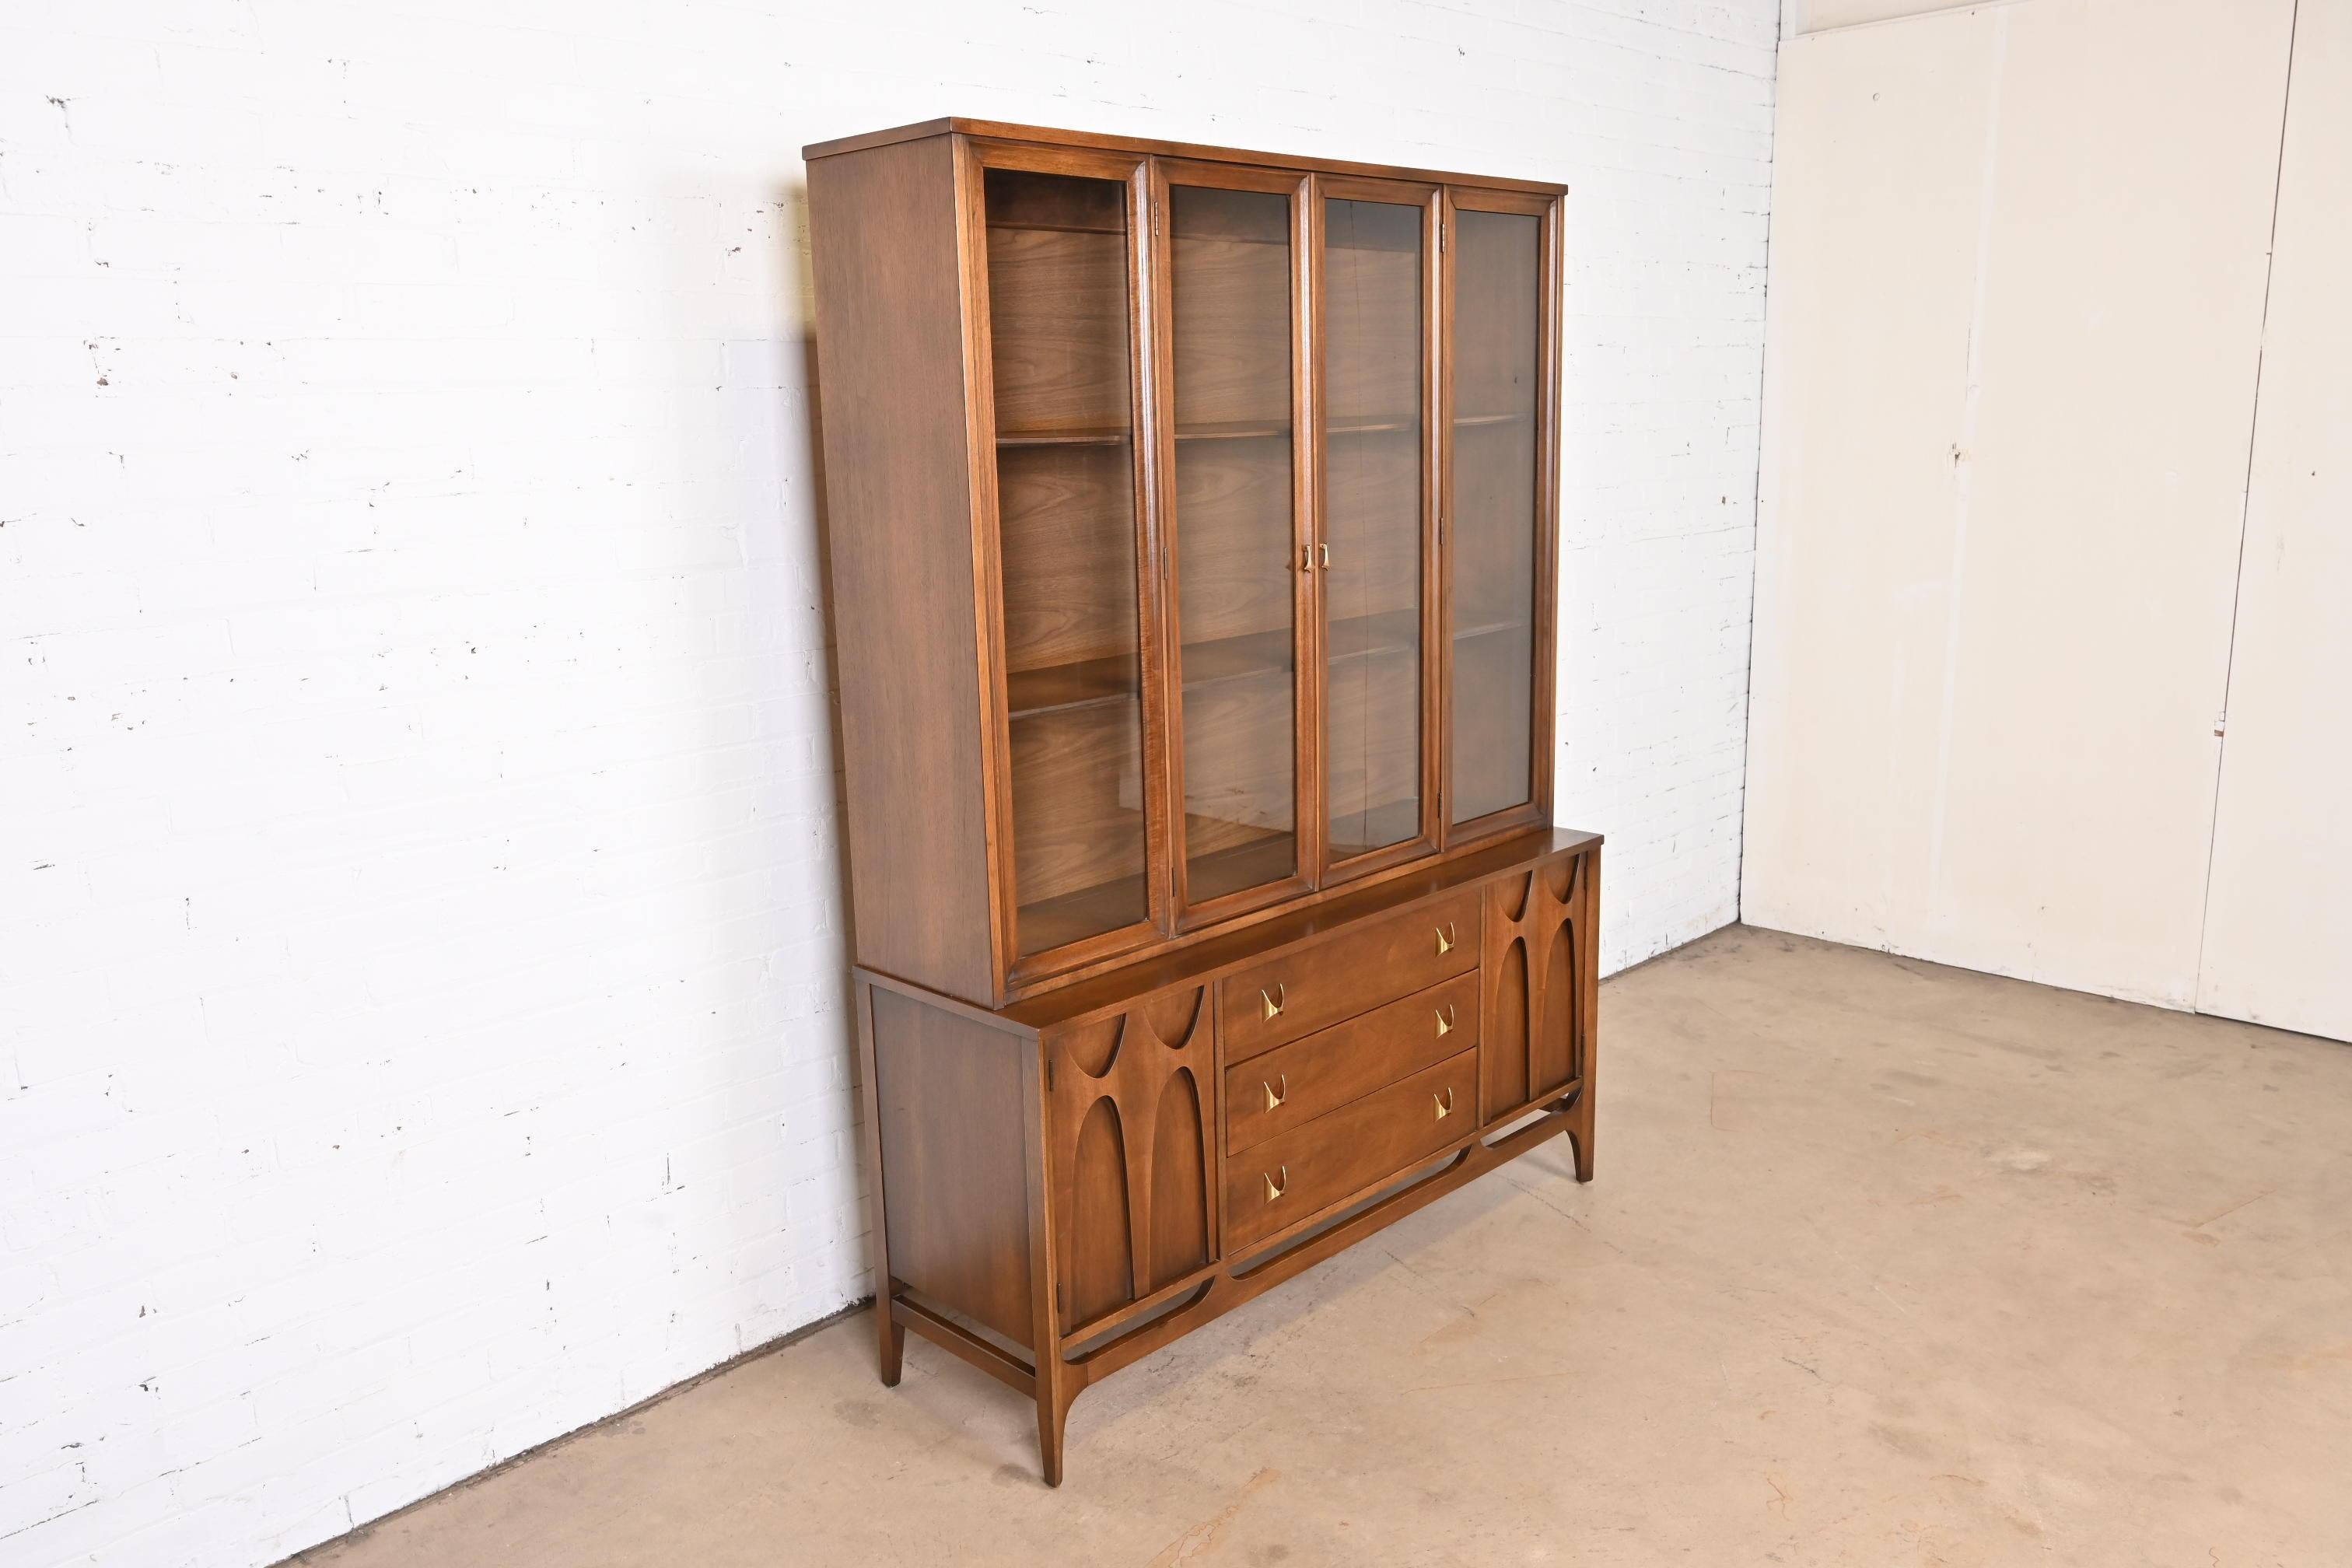 American Broyhill Brasilia Sculpted Walnut Breakfront Bookcase or China Cabinet, 1960s